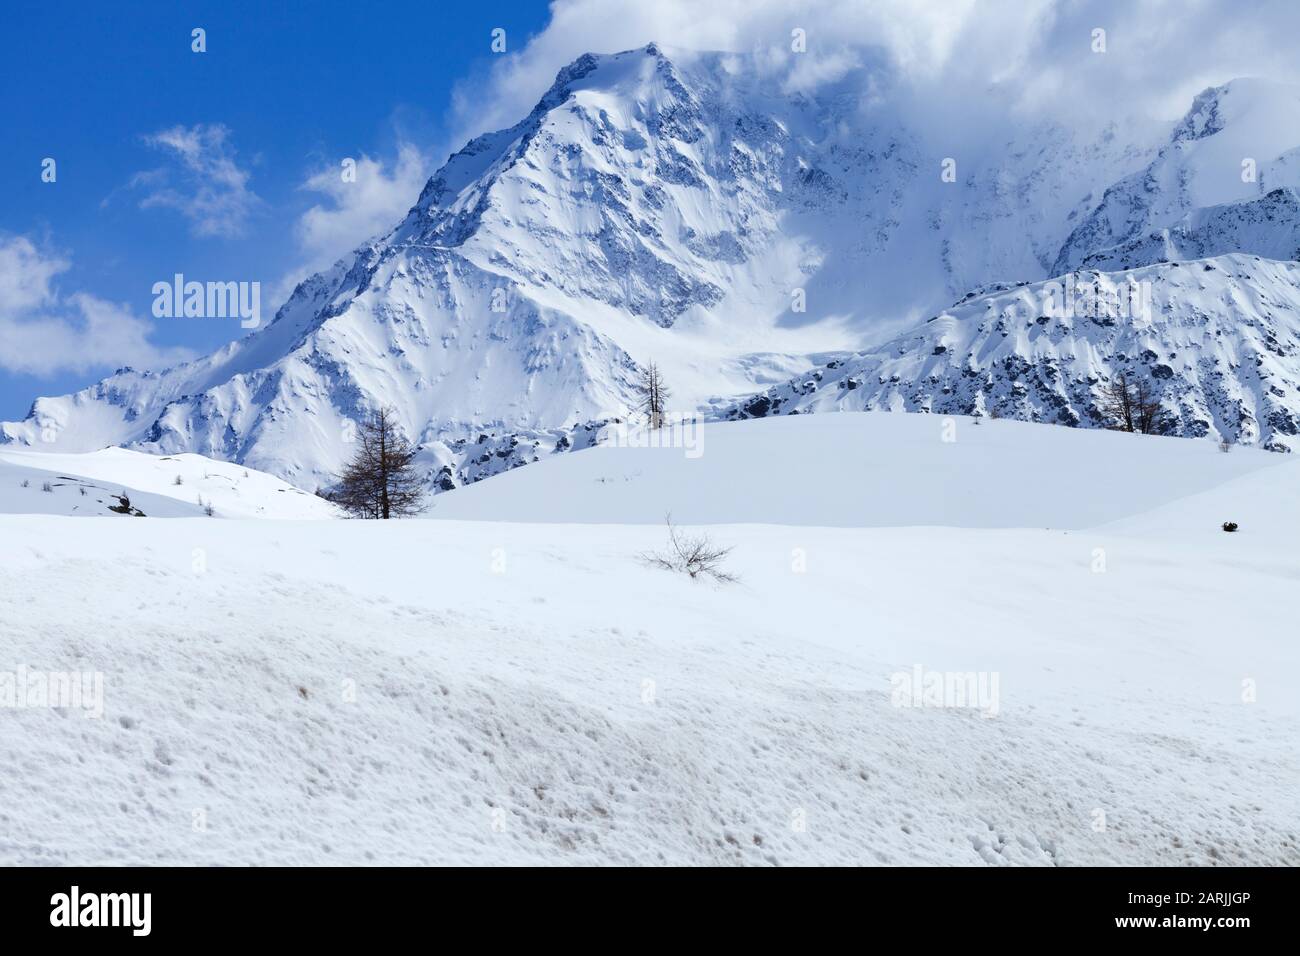 Snowy mountain covered with clouds, winter landscape in Swiss Alps . Stock Photo